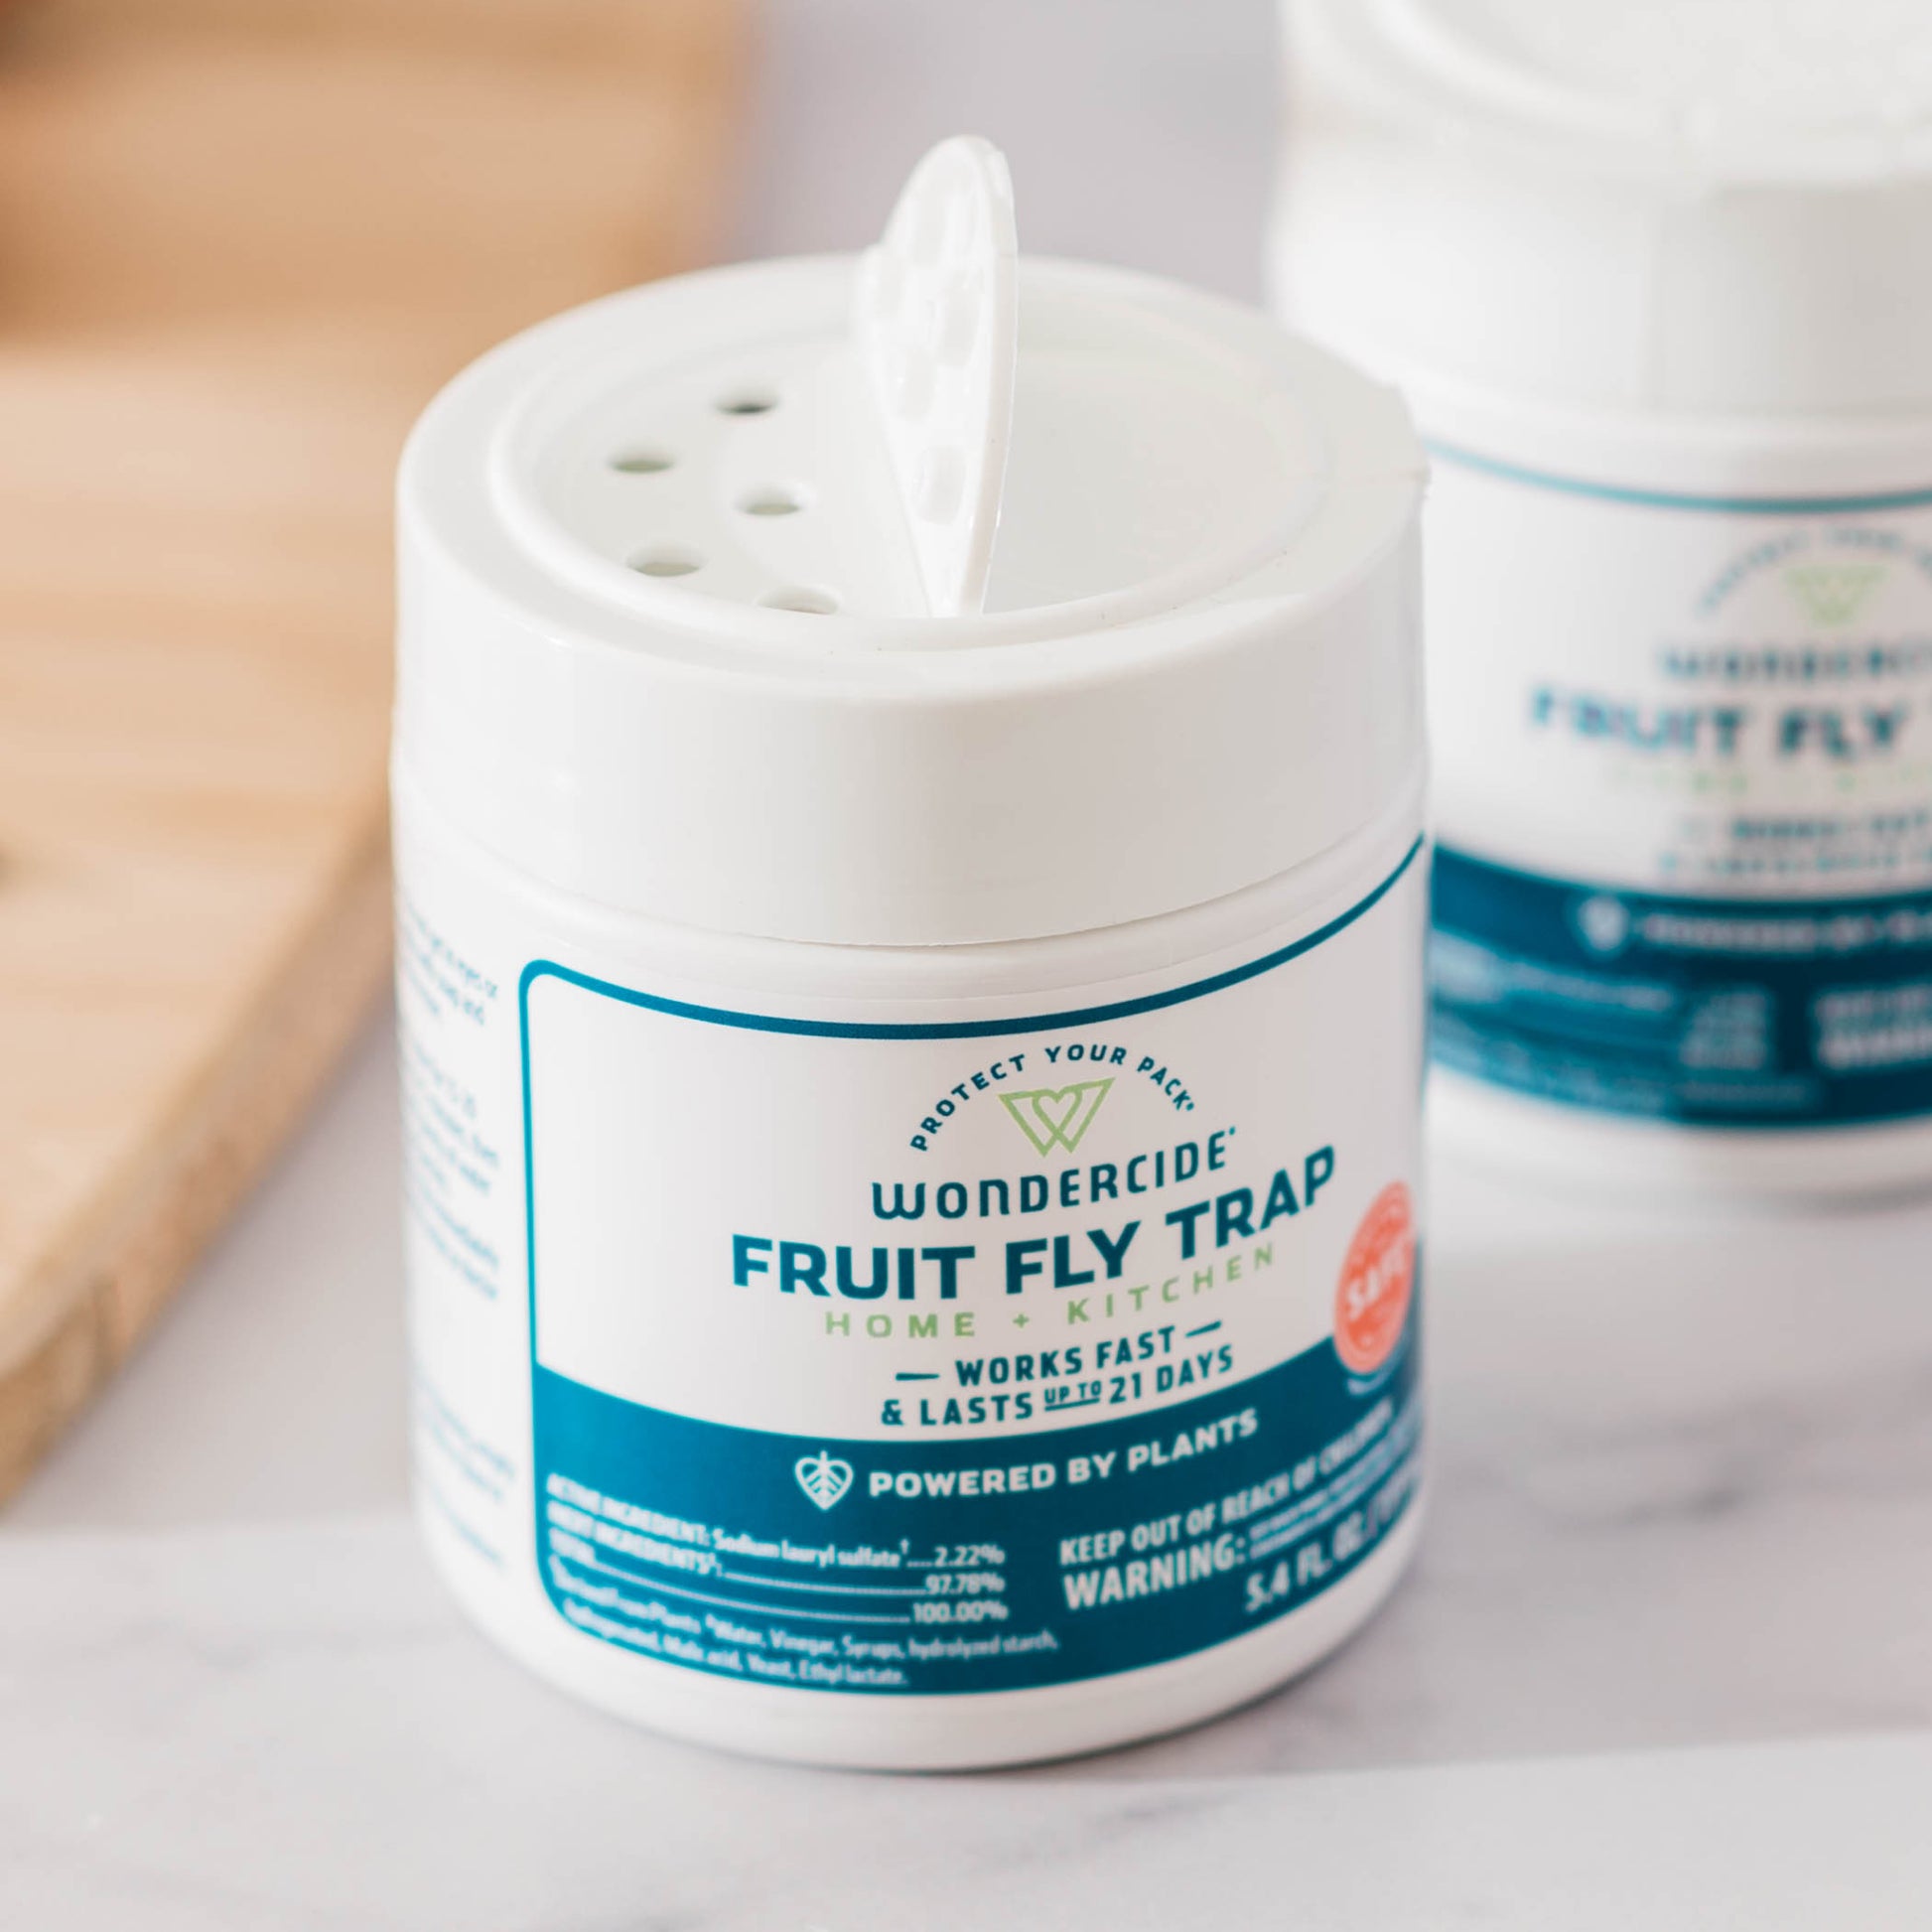 Fruit Fly Traps, Fruit Fly Control